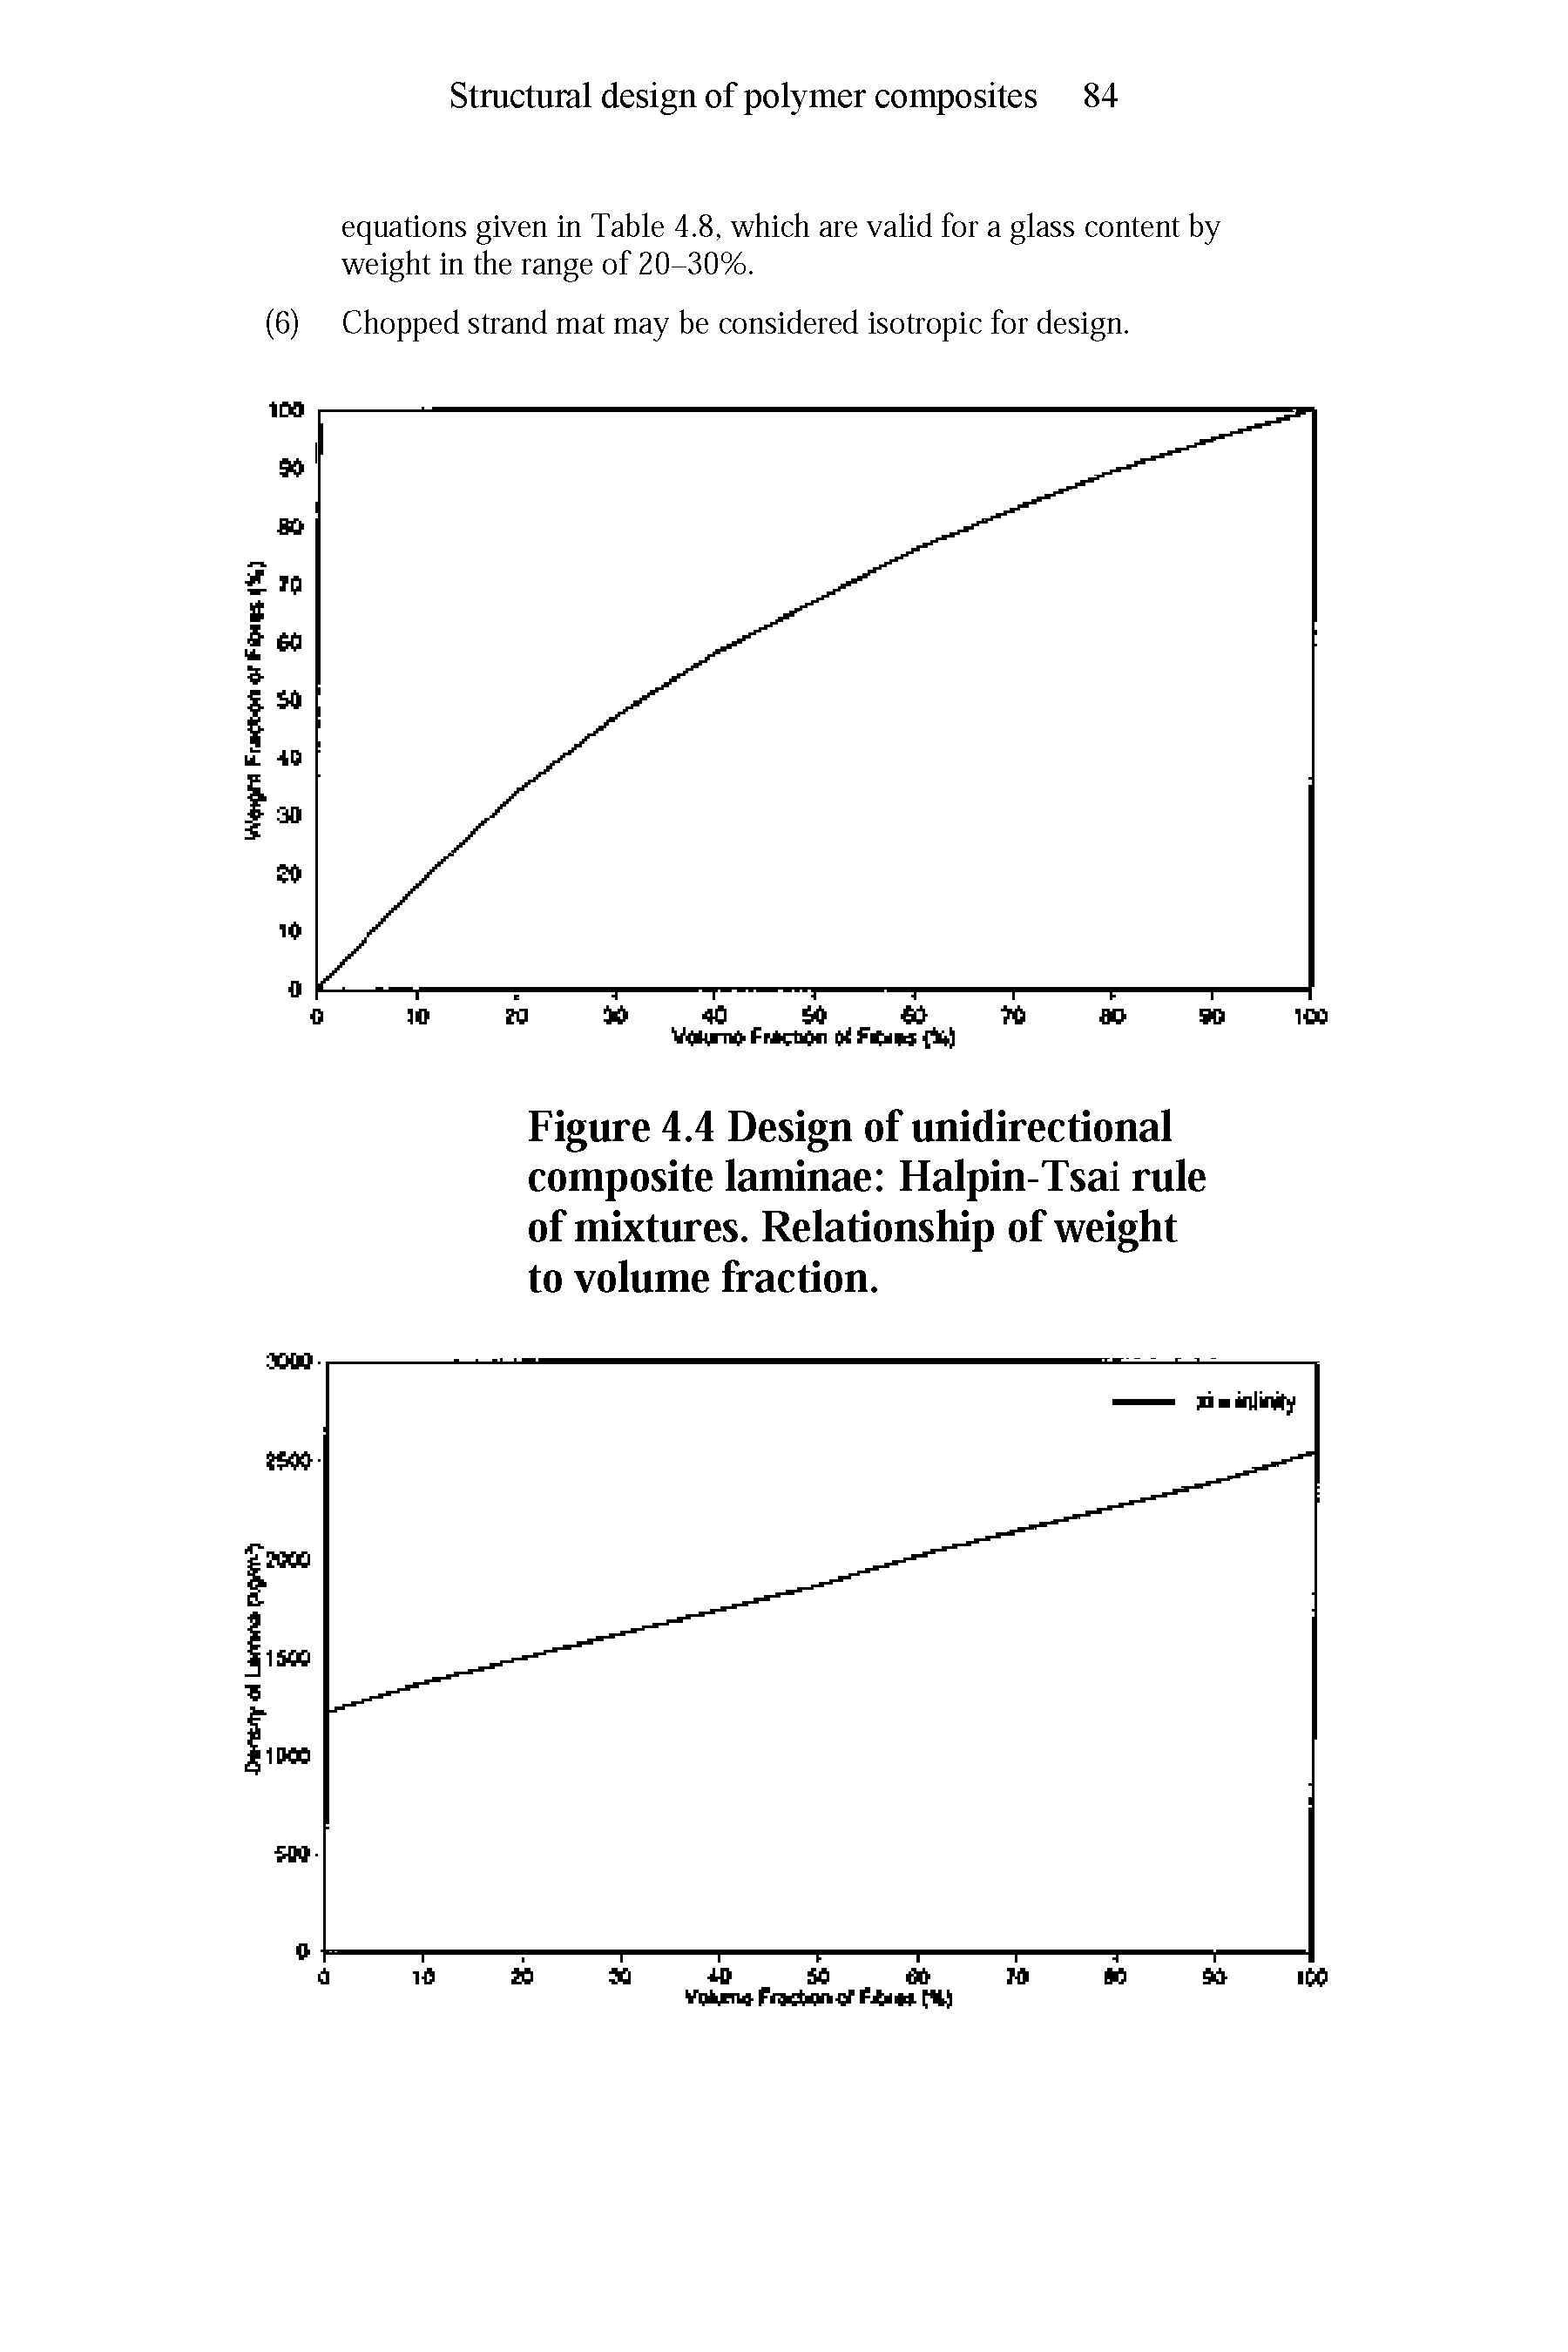 Figure 4.4 Design of unidirectional composite laminae Halpin-Tsai rule of mixtures. Relationship of weight to volume fraction.